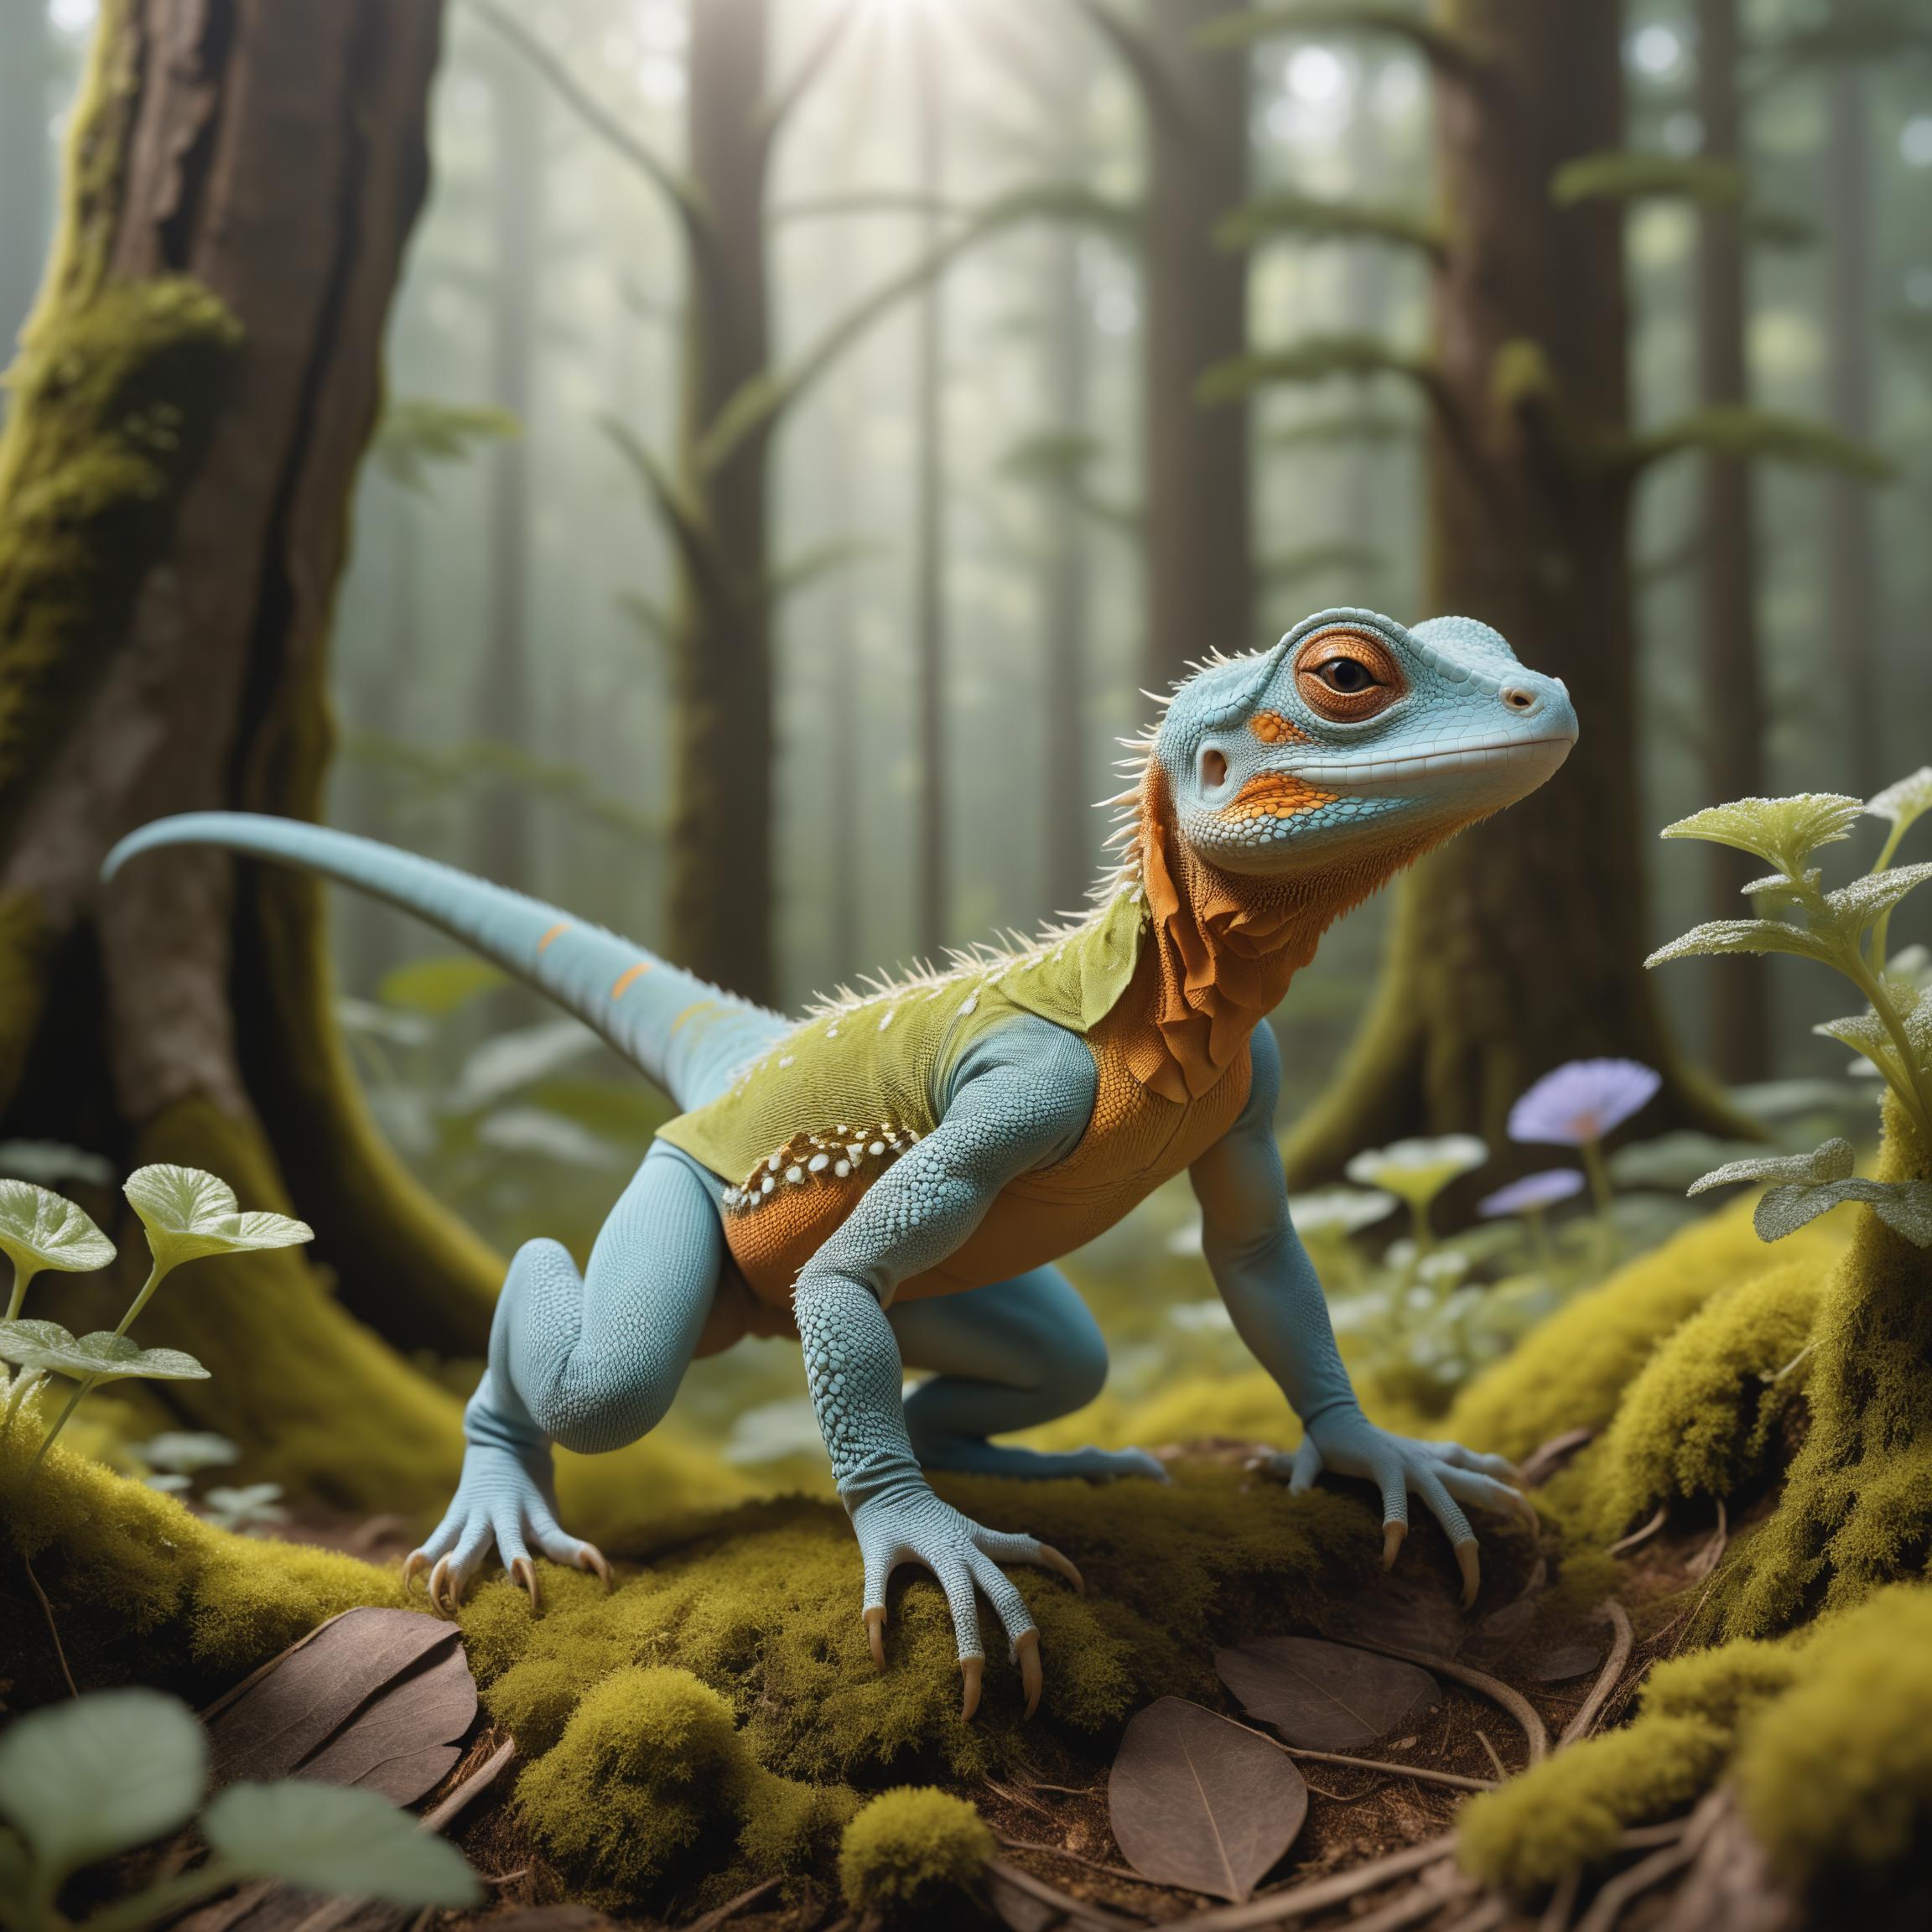 A blue and orange lizard on a mossy tree branch.